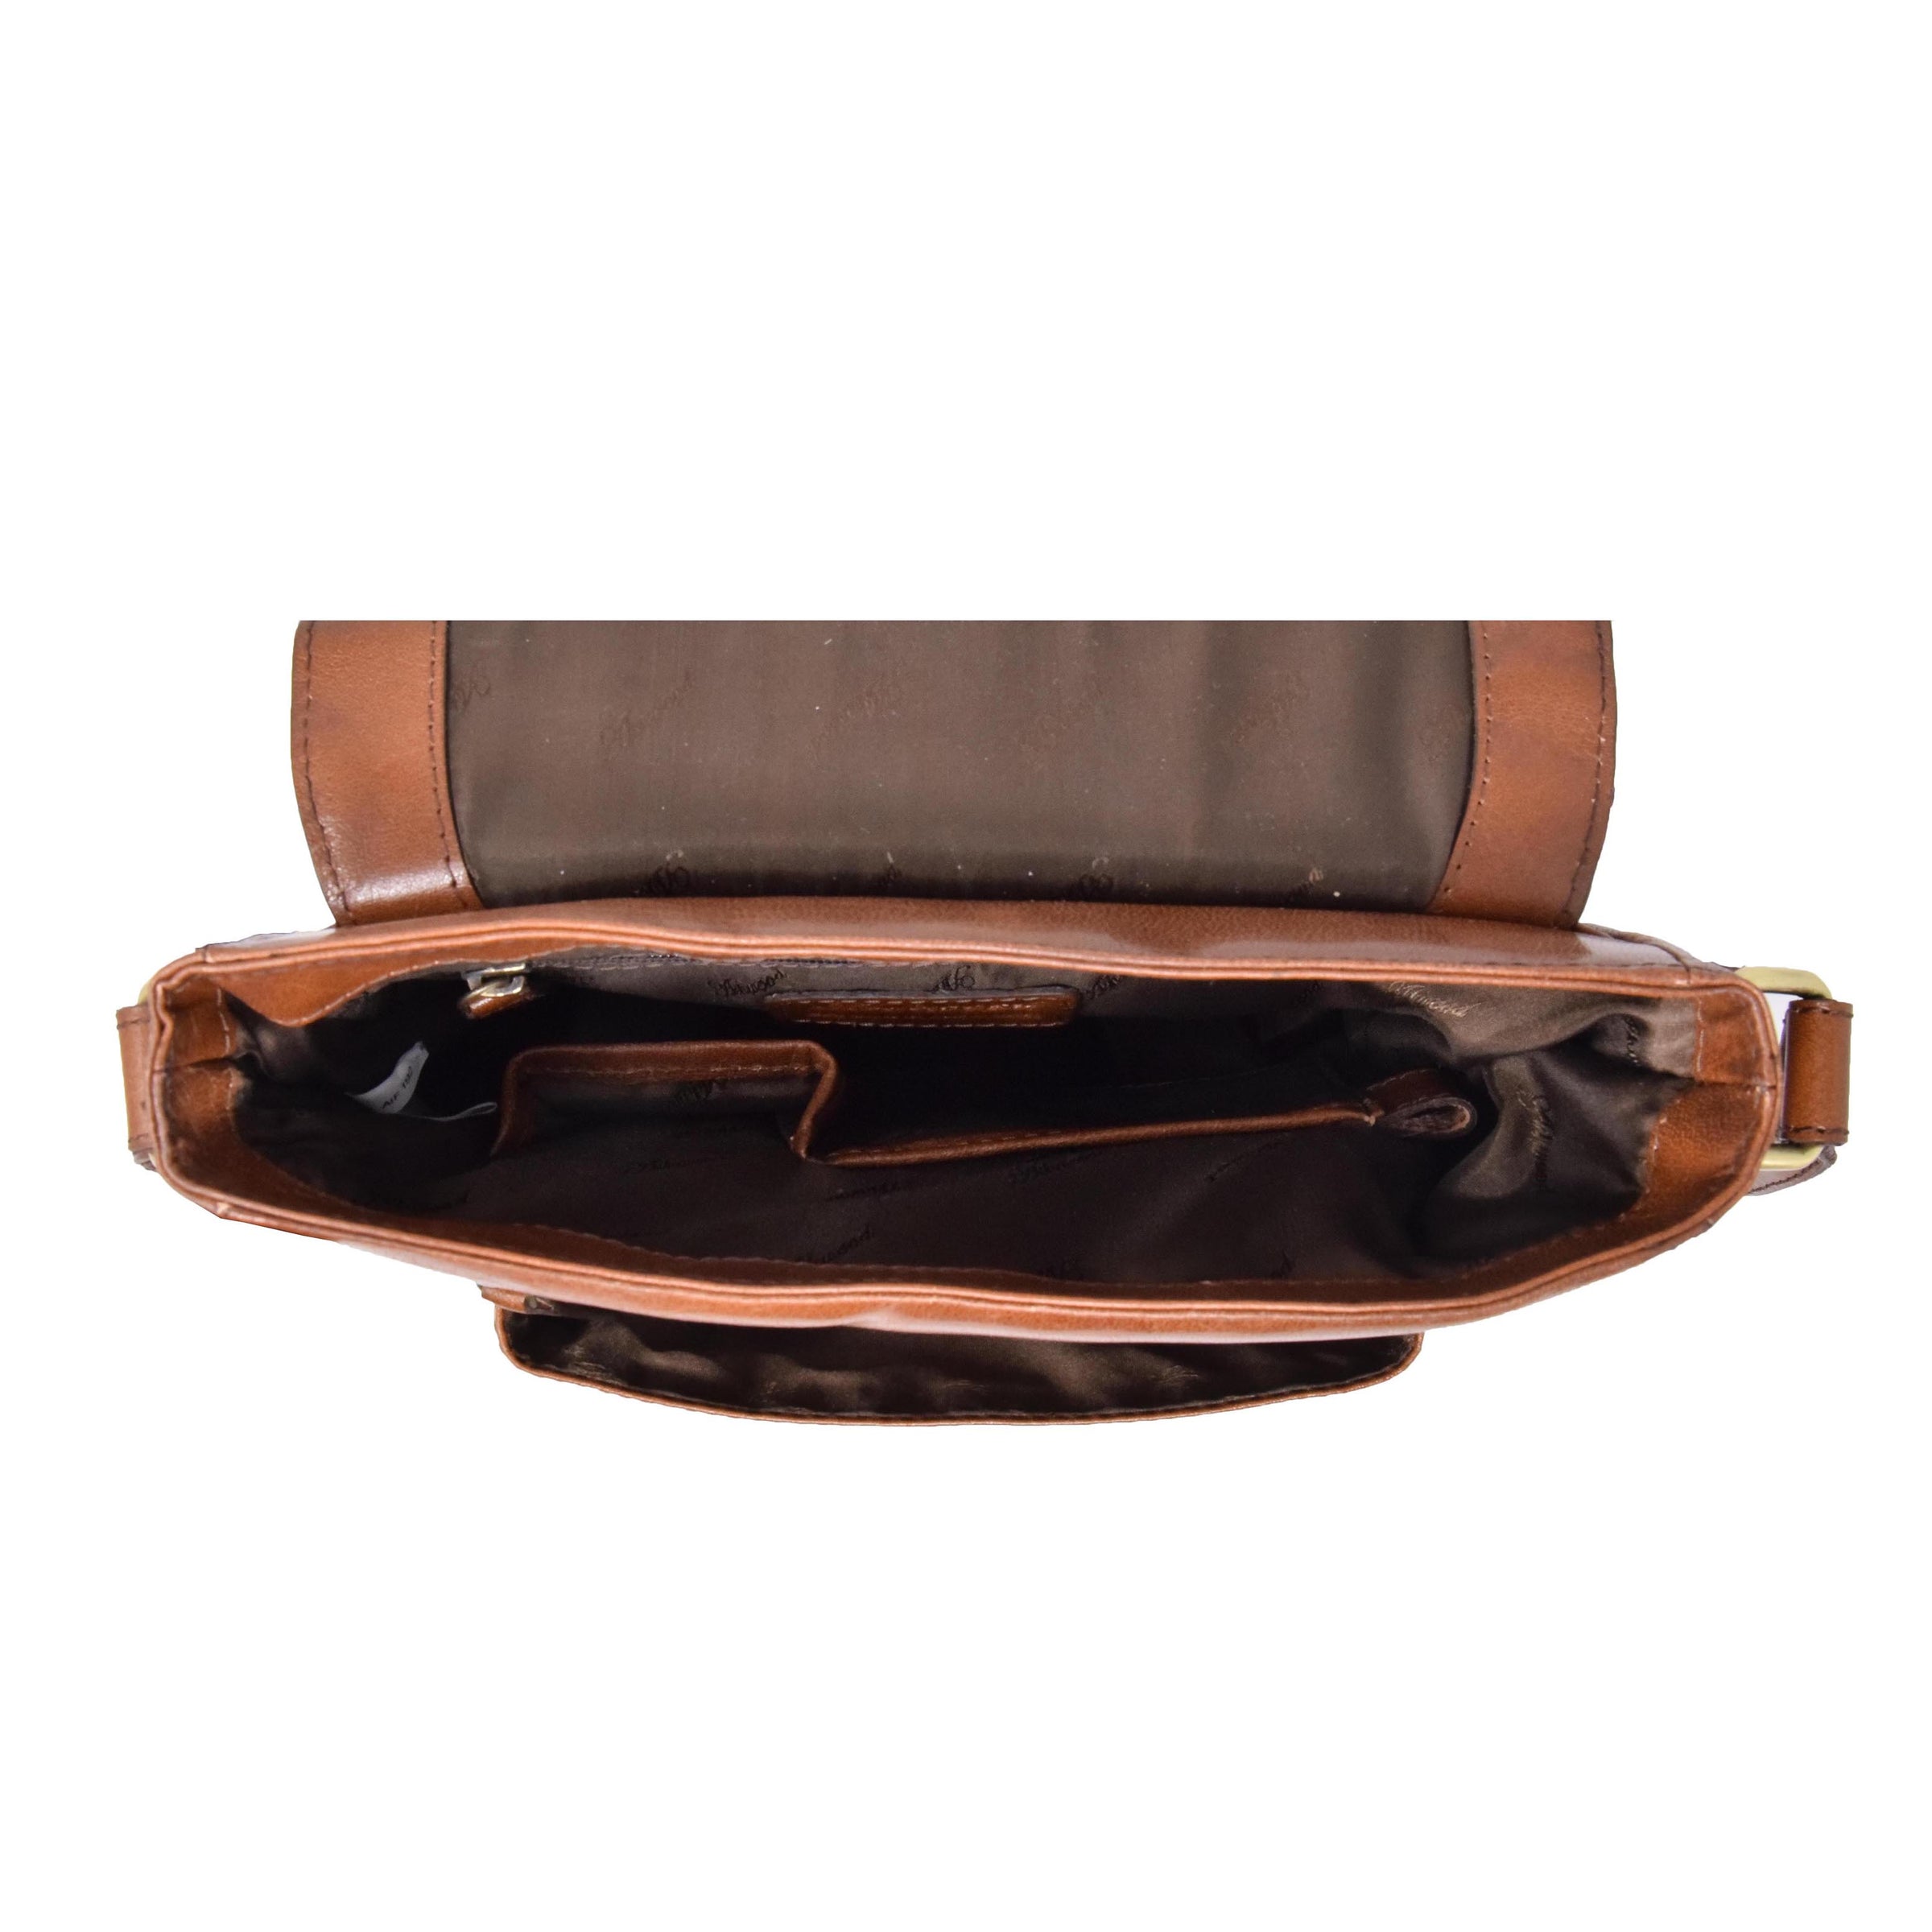 Flap Over Cross Body Flight Bag Tan | House of Leather